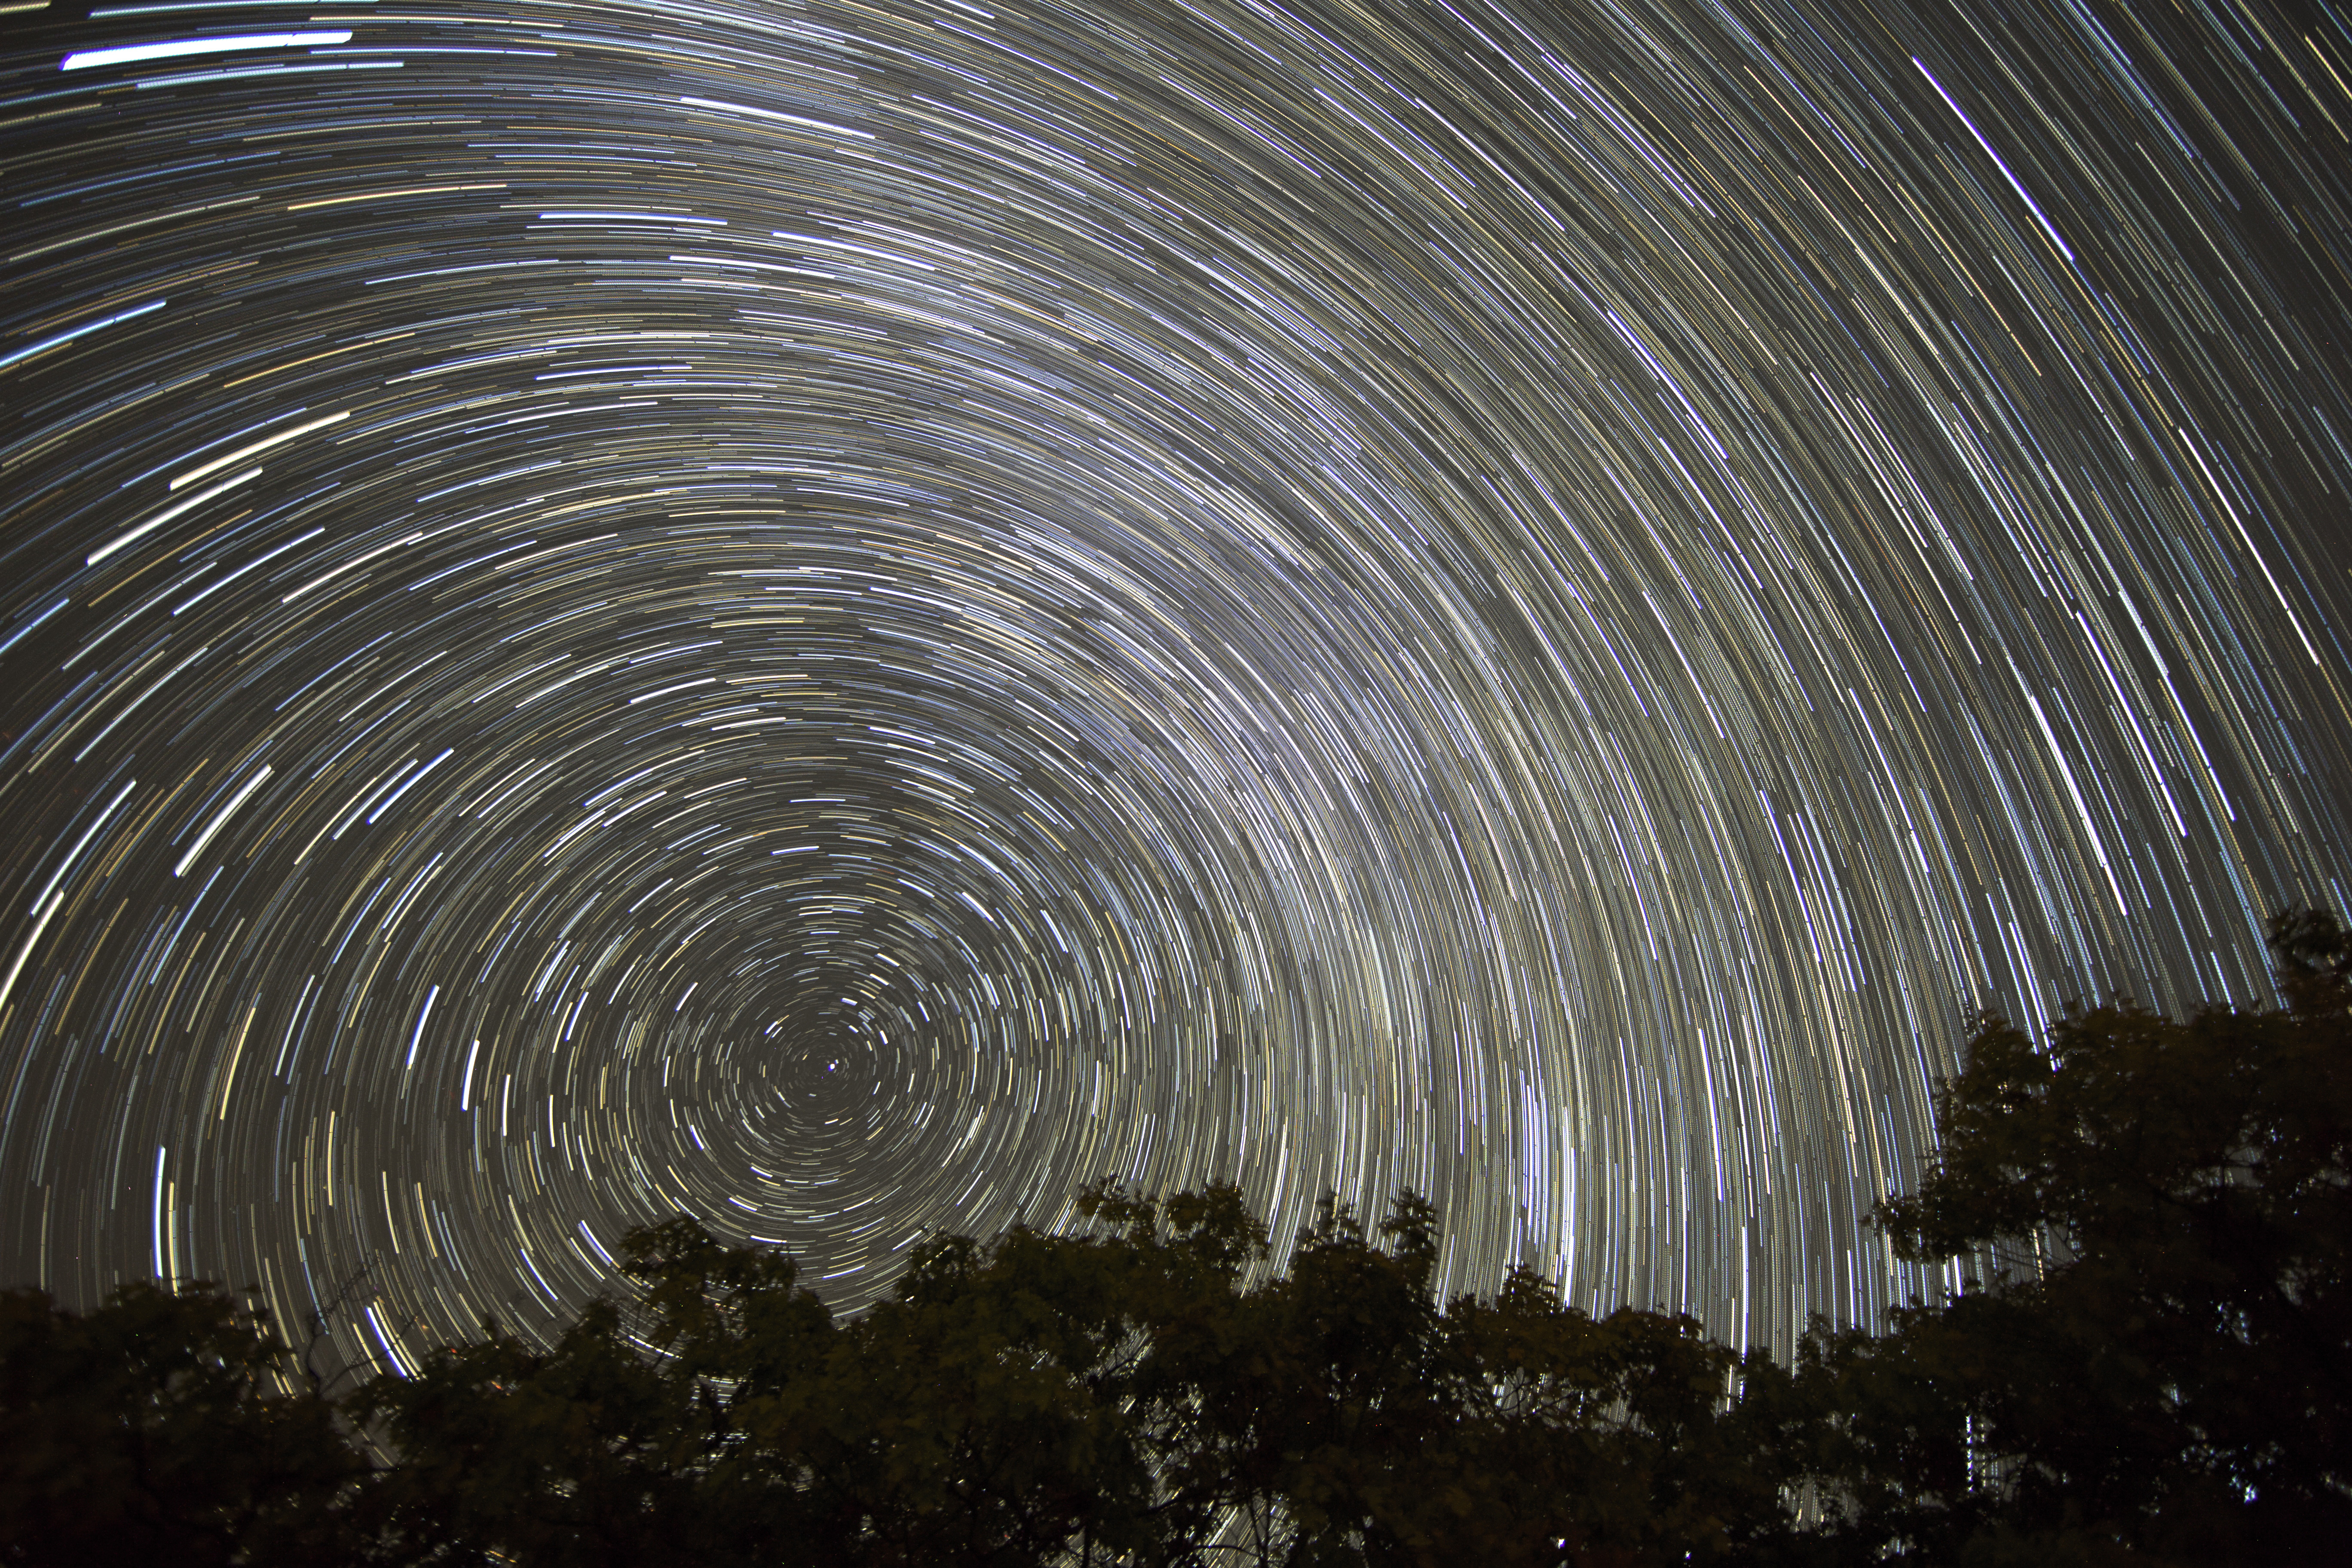 Alone Staring At Star Trail Wallpapers